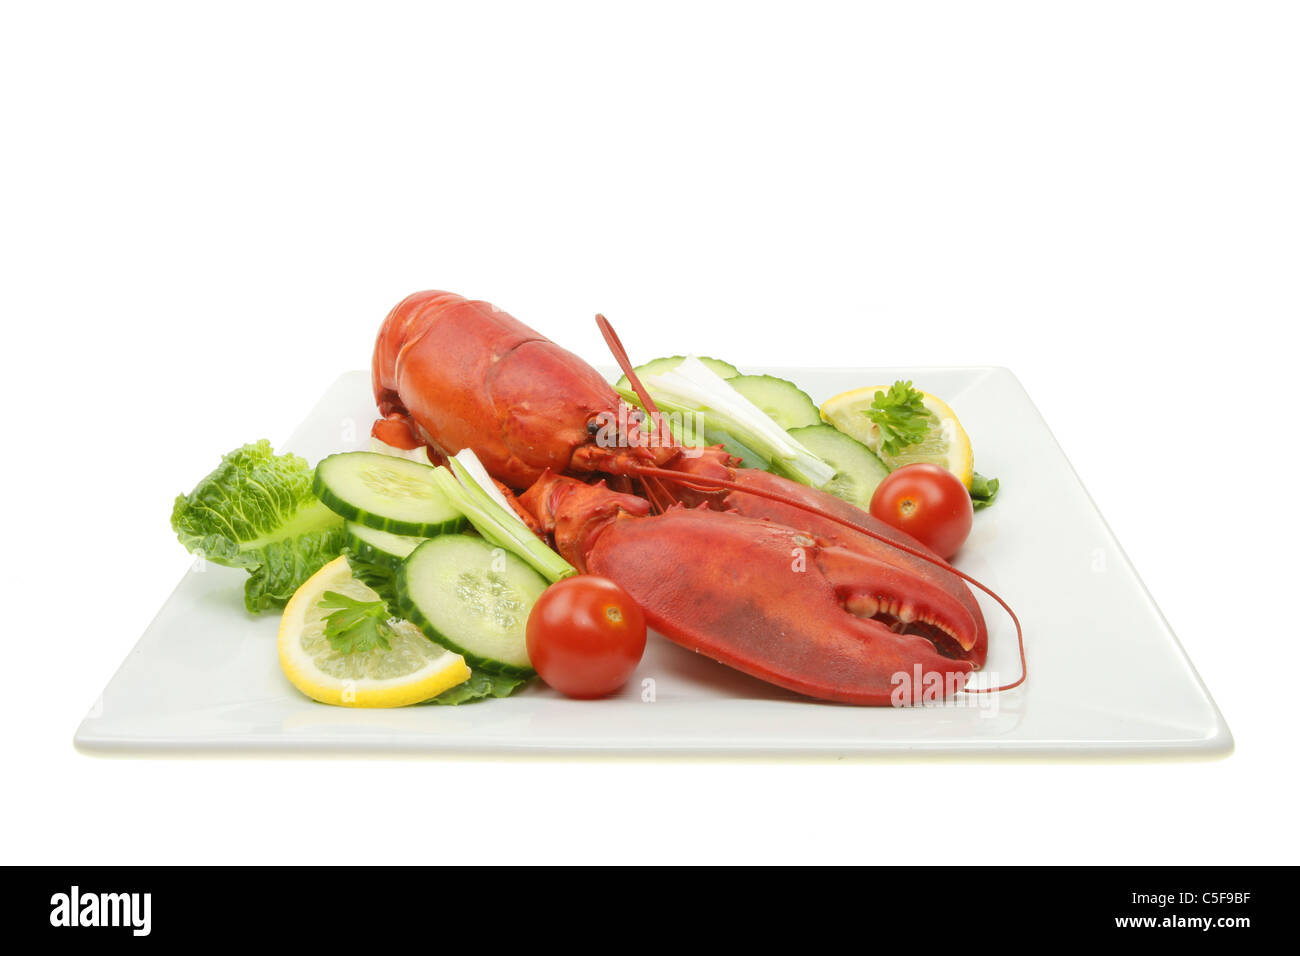 Whole cooked lobster with salad on a plate Stock Photo